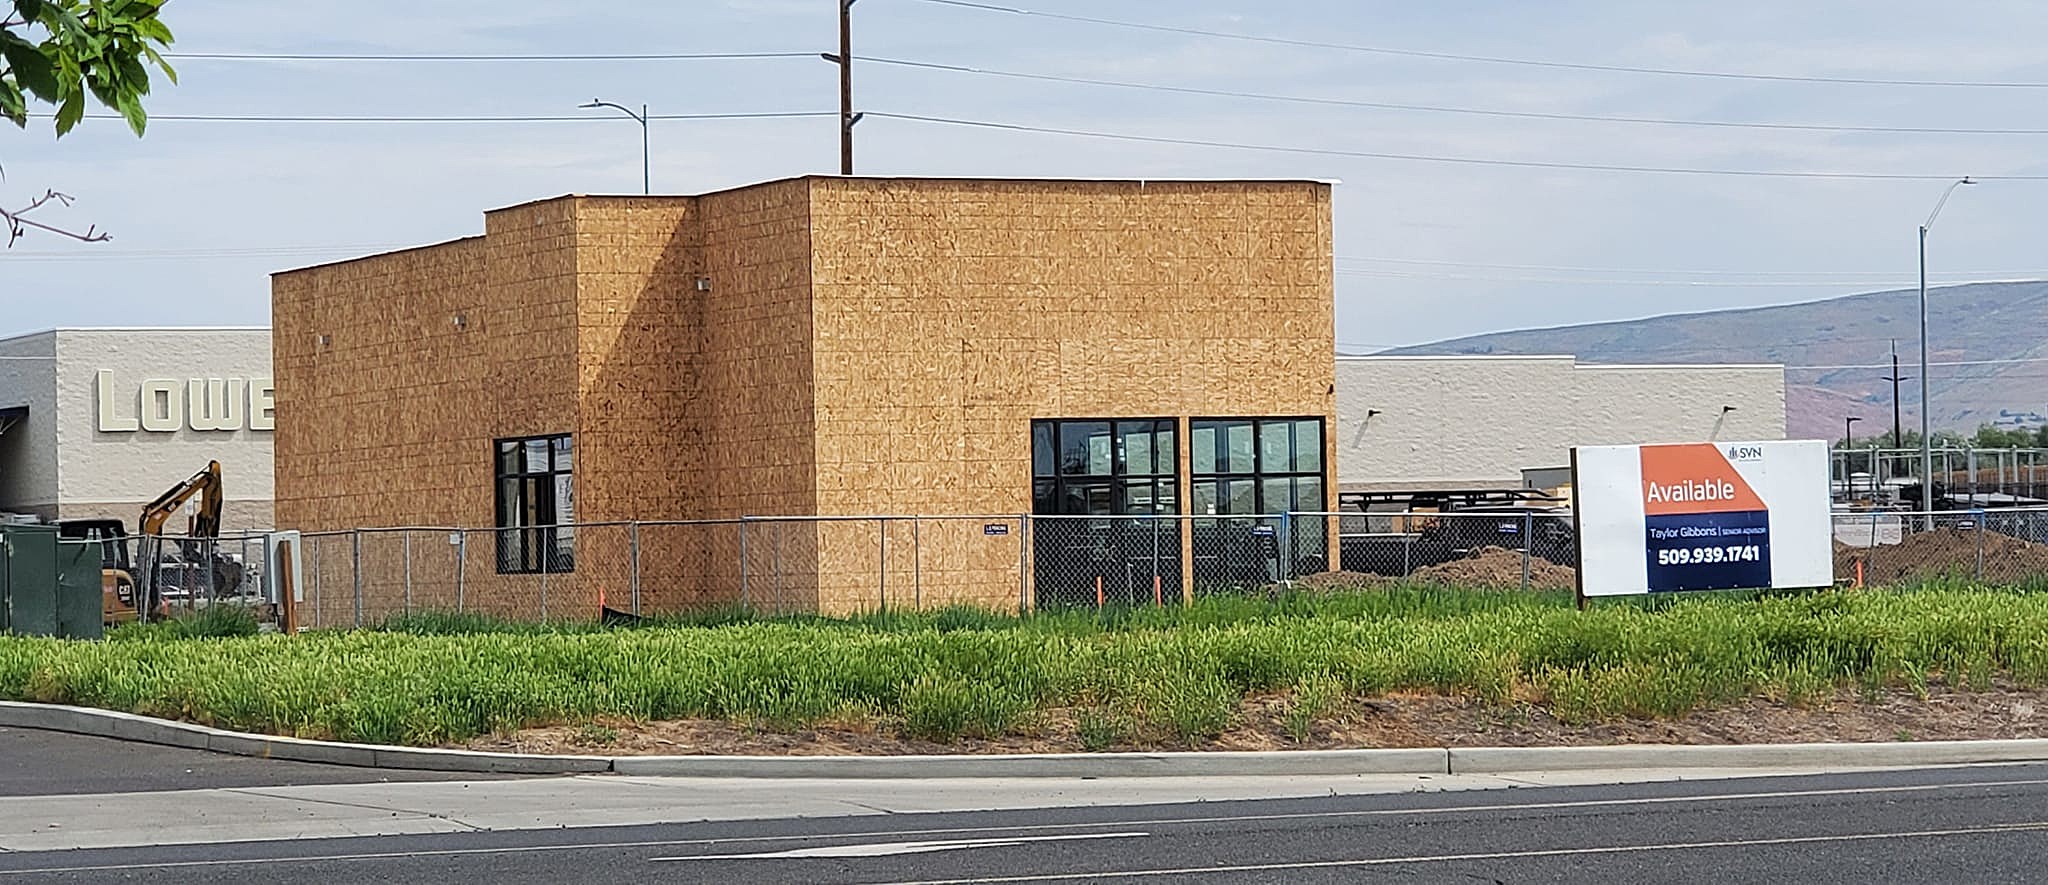 Are You Excited or Disappointed on Whats Being Built by Winco?